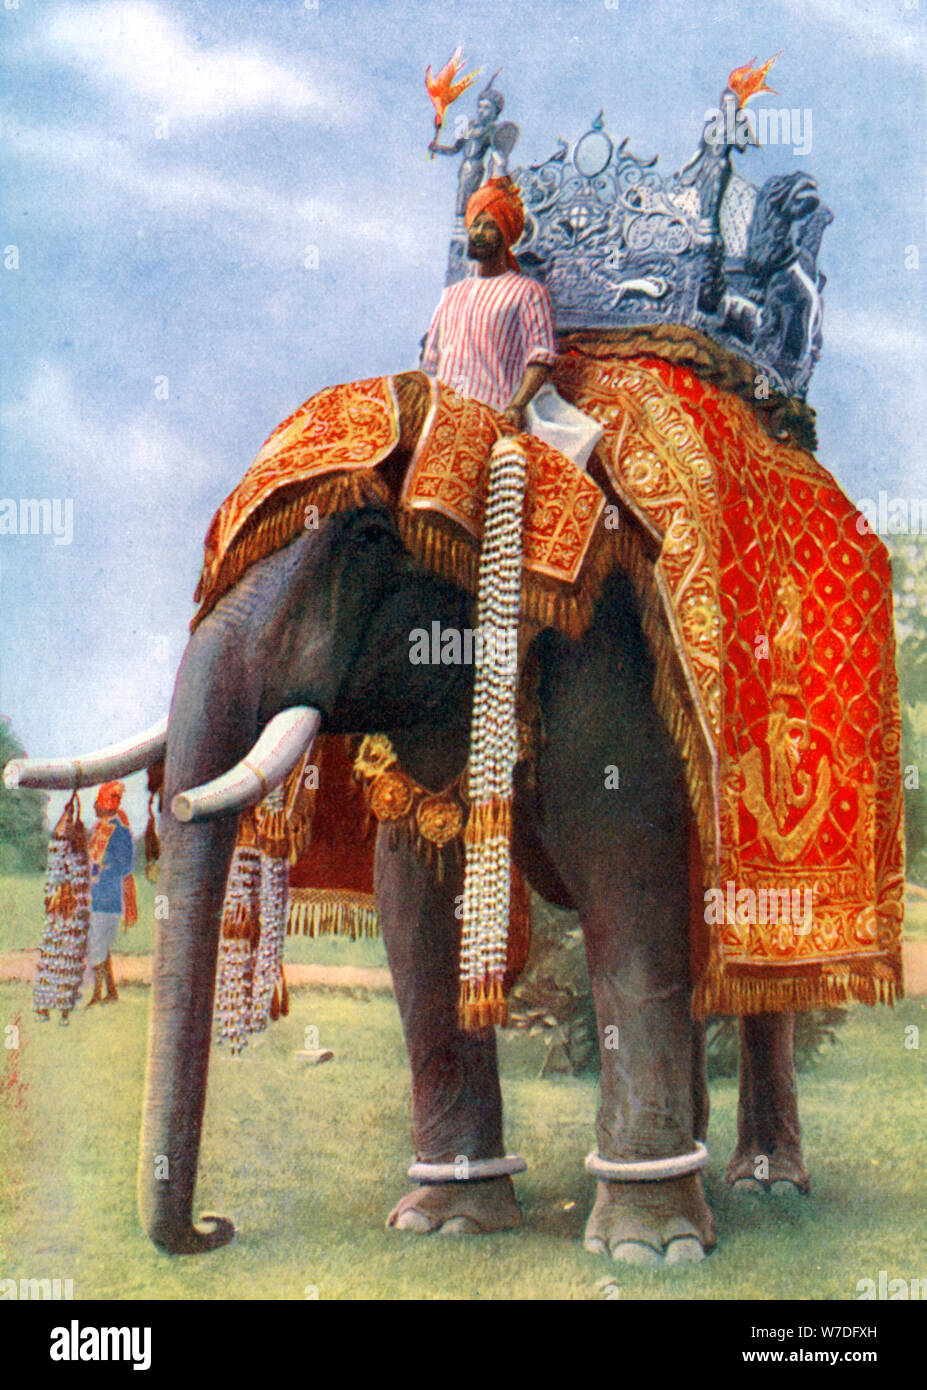 A majestic elephant at Bengal's chief festive gathering, India, 1922.Artist: L Barber Stock Photo